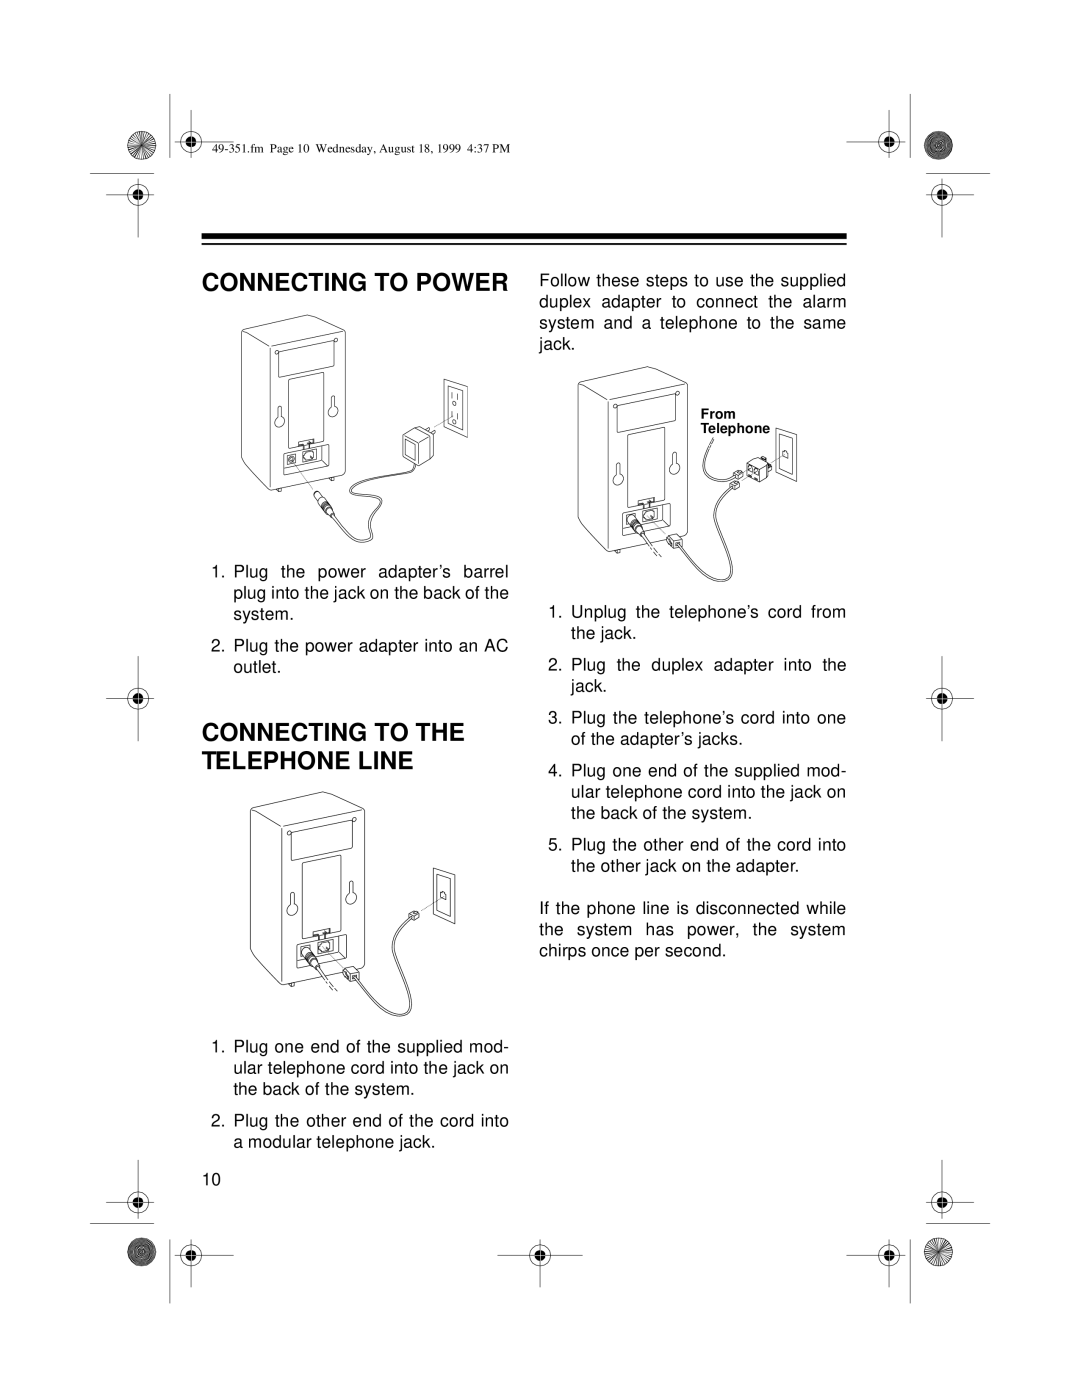 Radio Shack 49-351 owner manual Connecting To The Telephone Line 